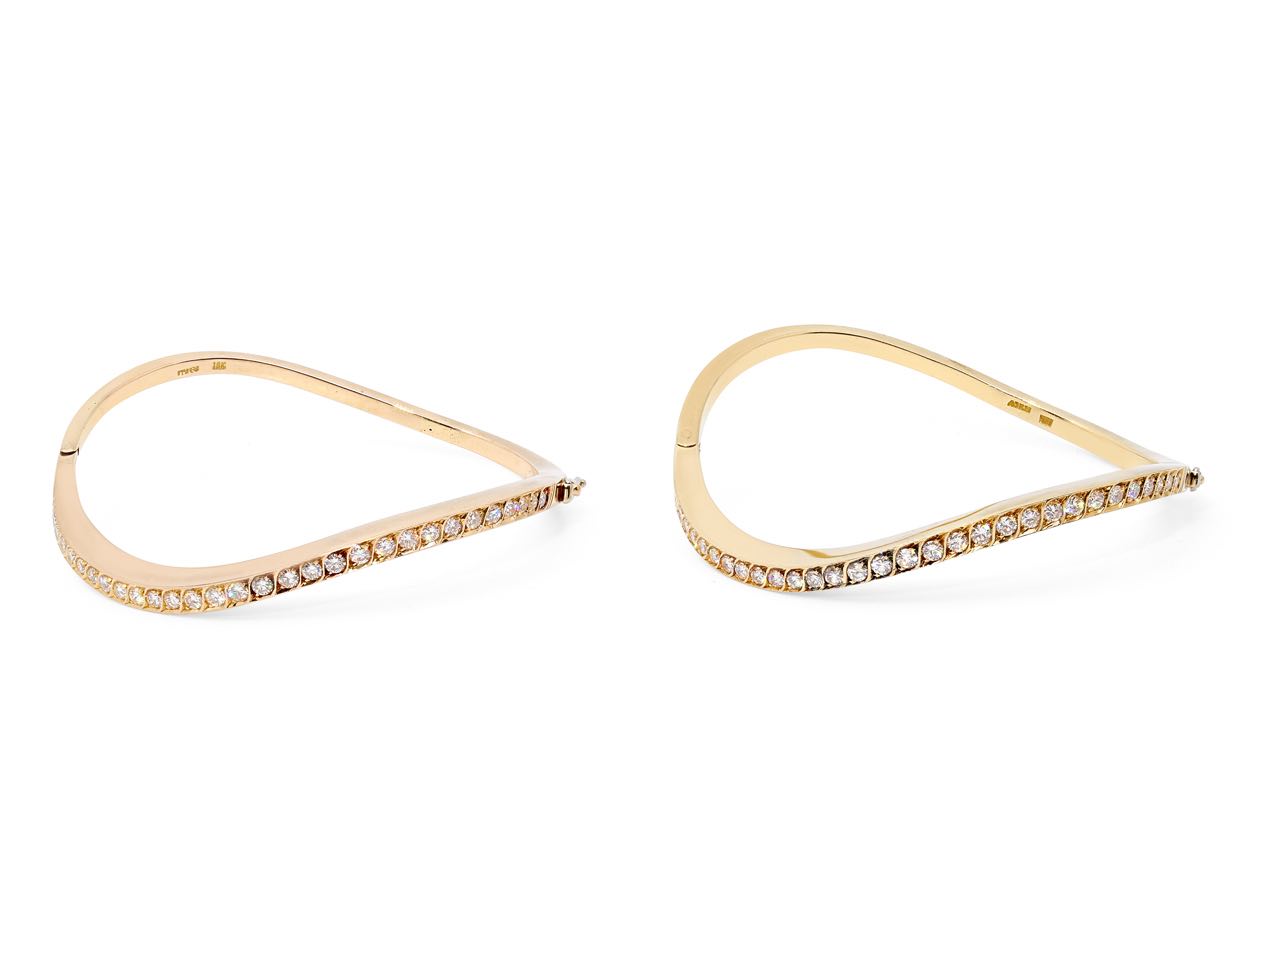 Pair of Diamond Wave Bangles in 18K Yellow and Rose Gold